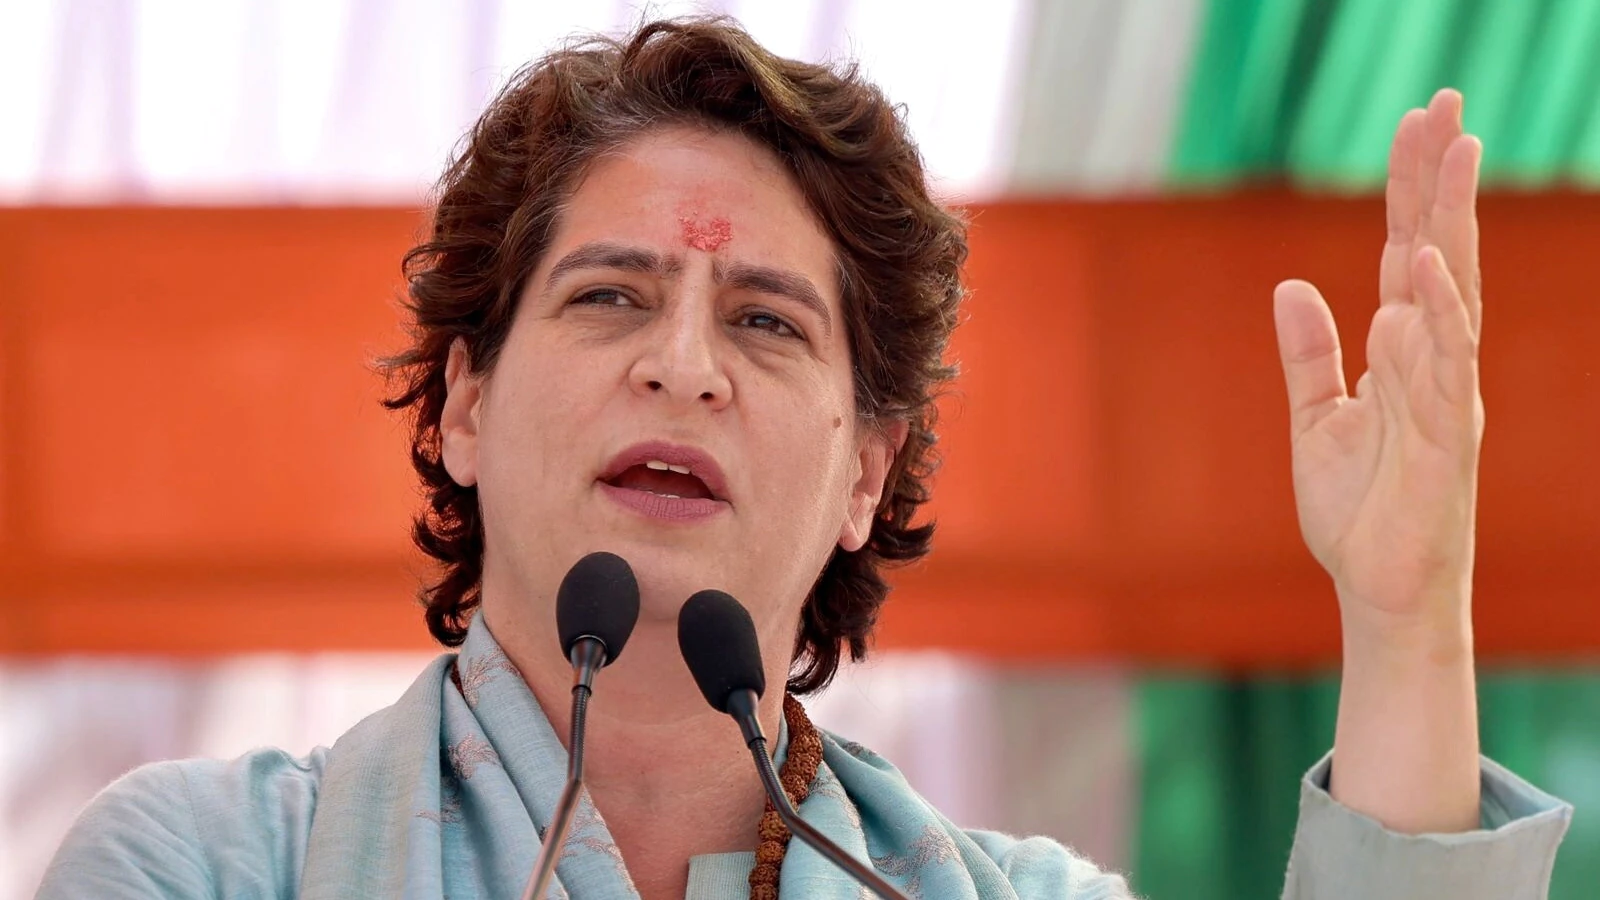 UP polls: Priyanka Gandhi Vadra aggressively campaigned in 300 assembly seats